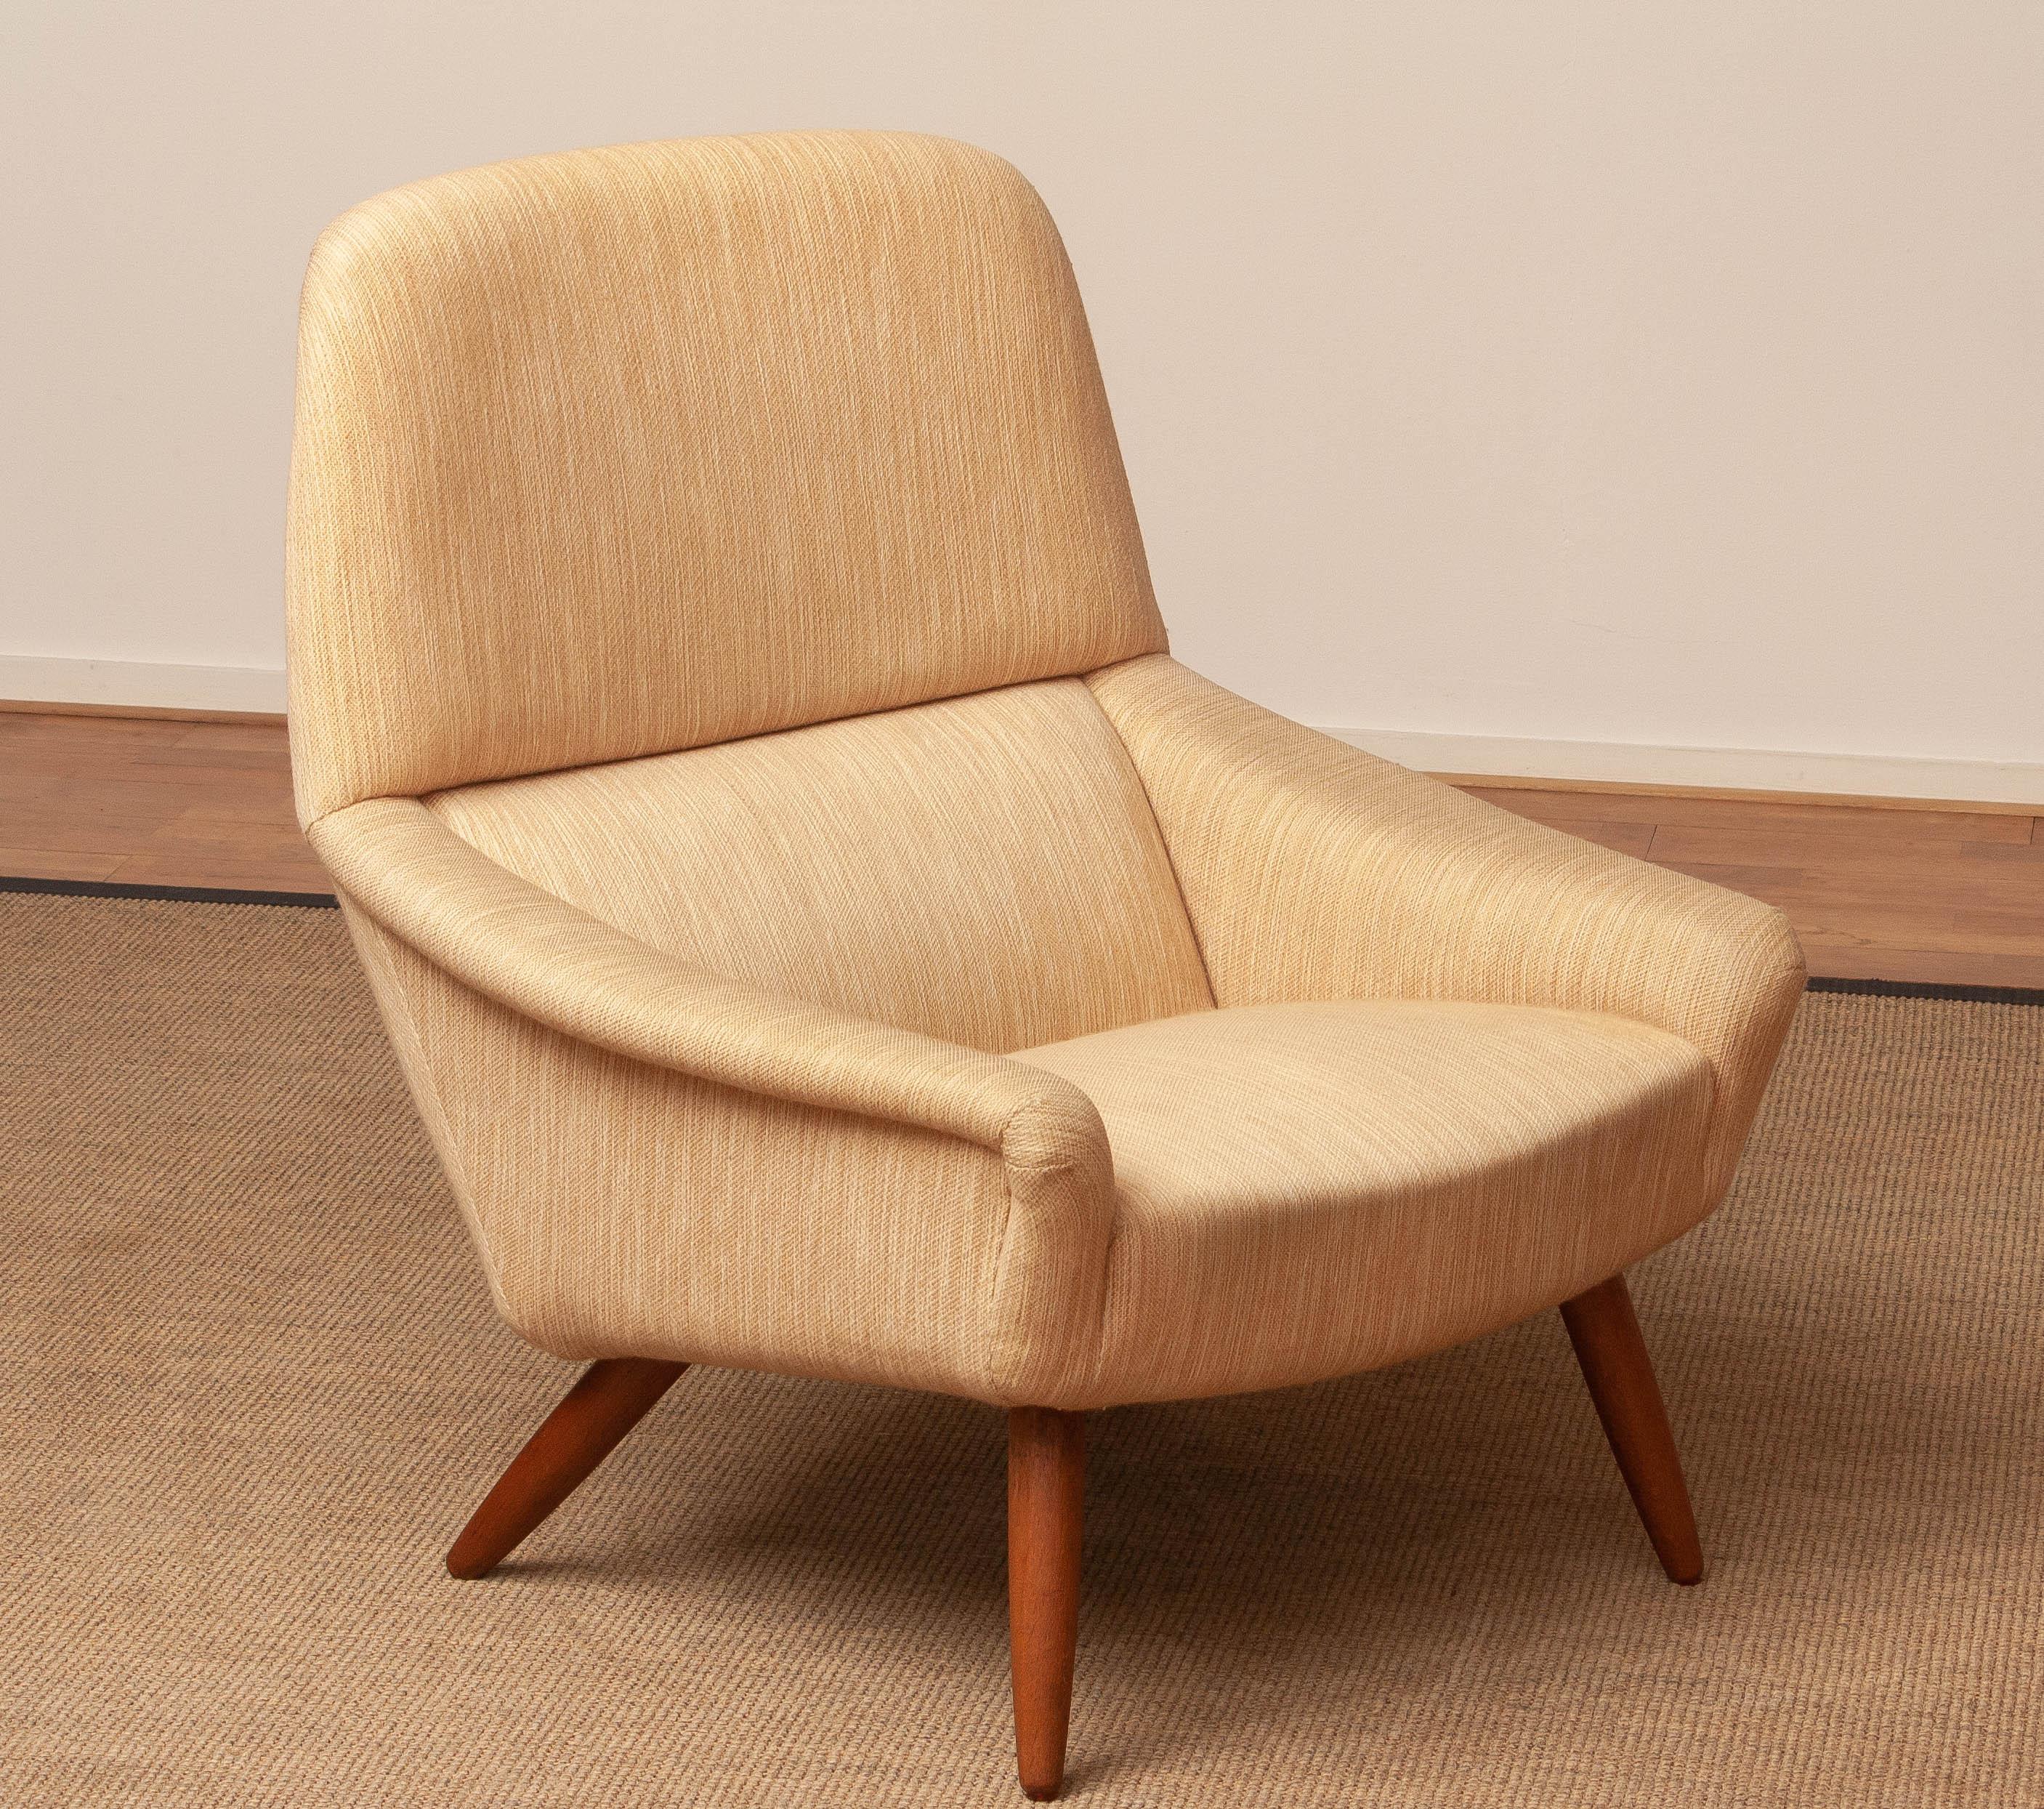 1960s Natural High Back Lounge Chair by Leif Hansen for Kronen in Denmark In Good Condition For Sale In Silvolde, Gelderland